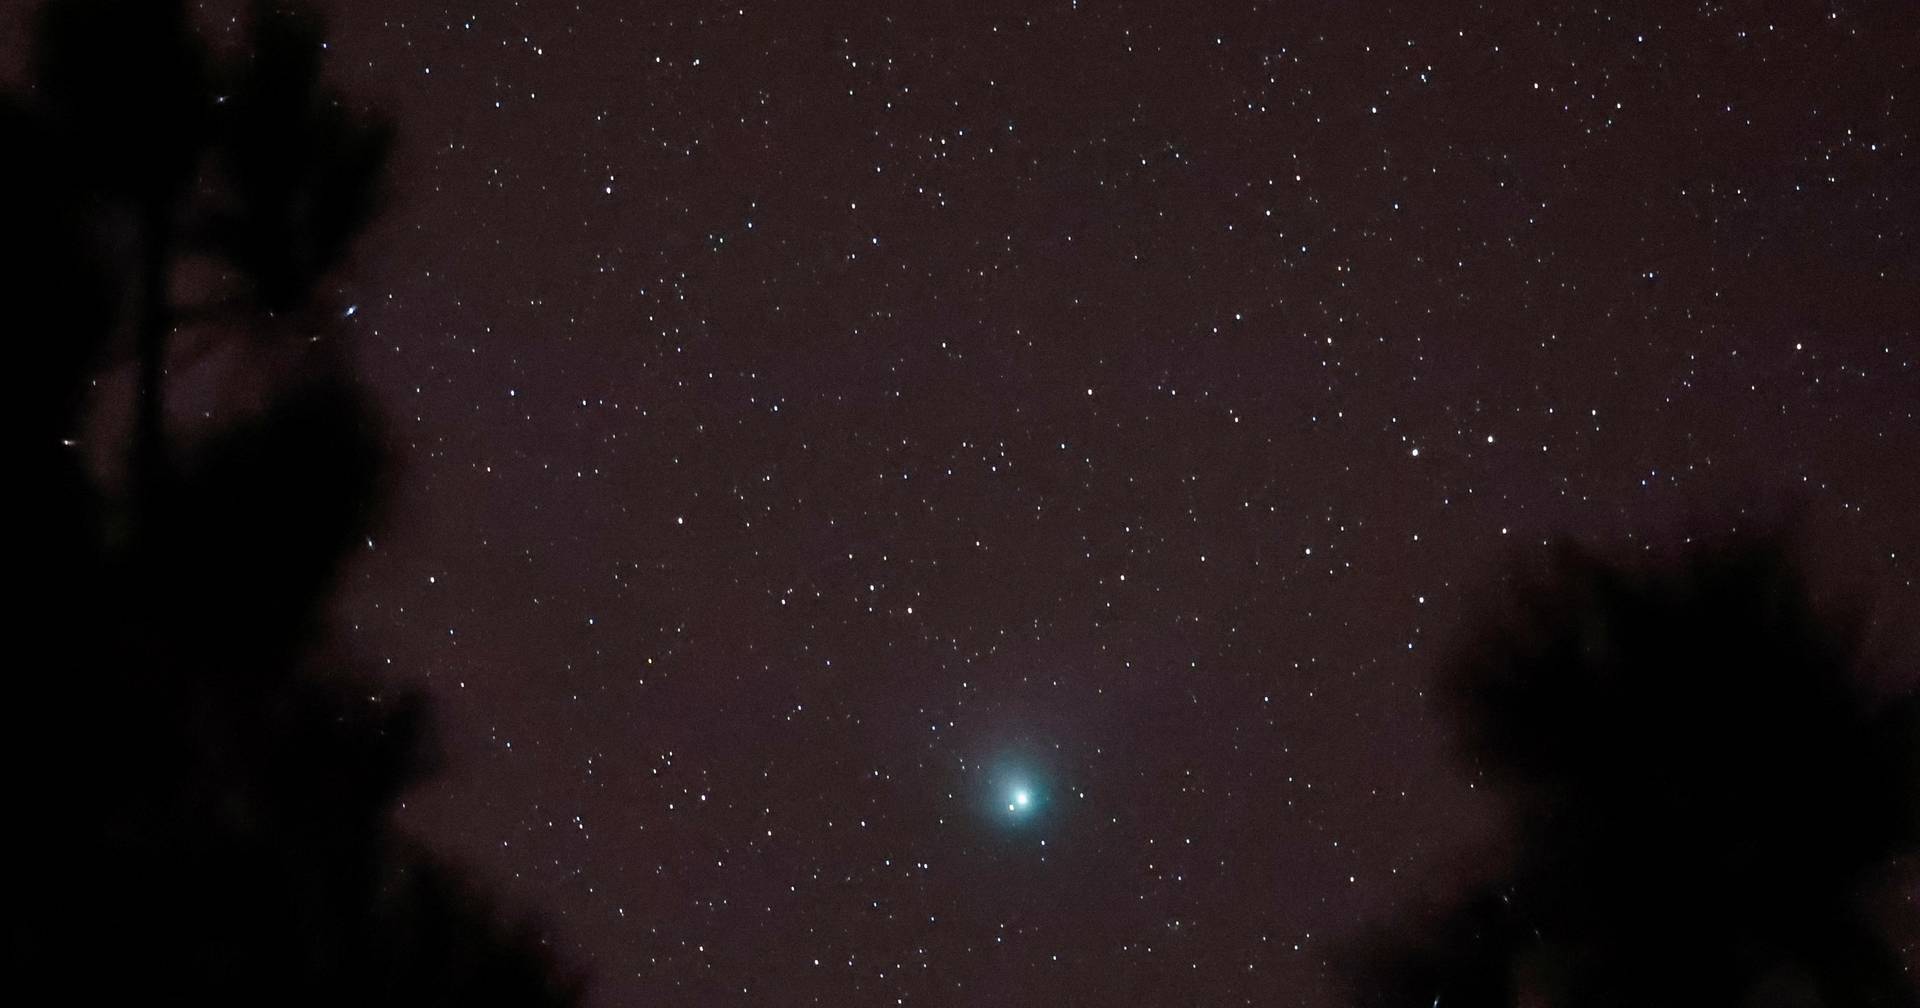 The “green comet” passes Earth before disappearing into the outer reaches of the solar system